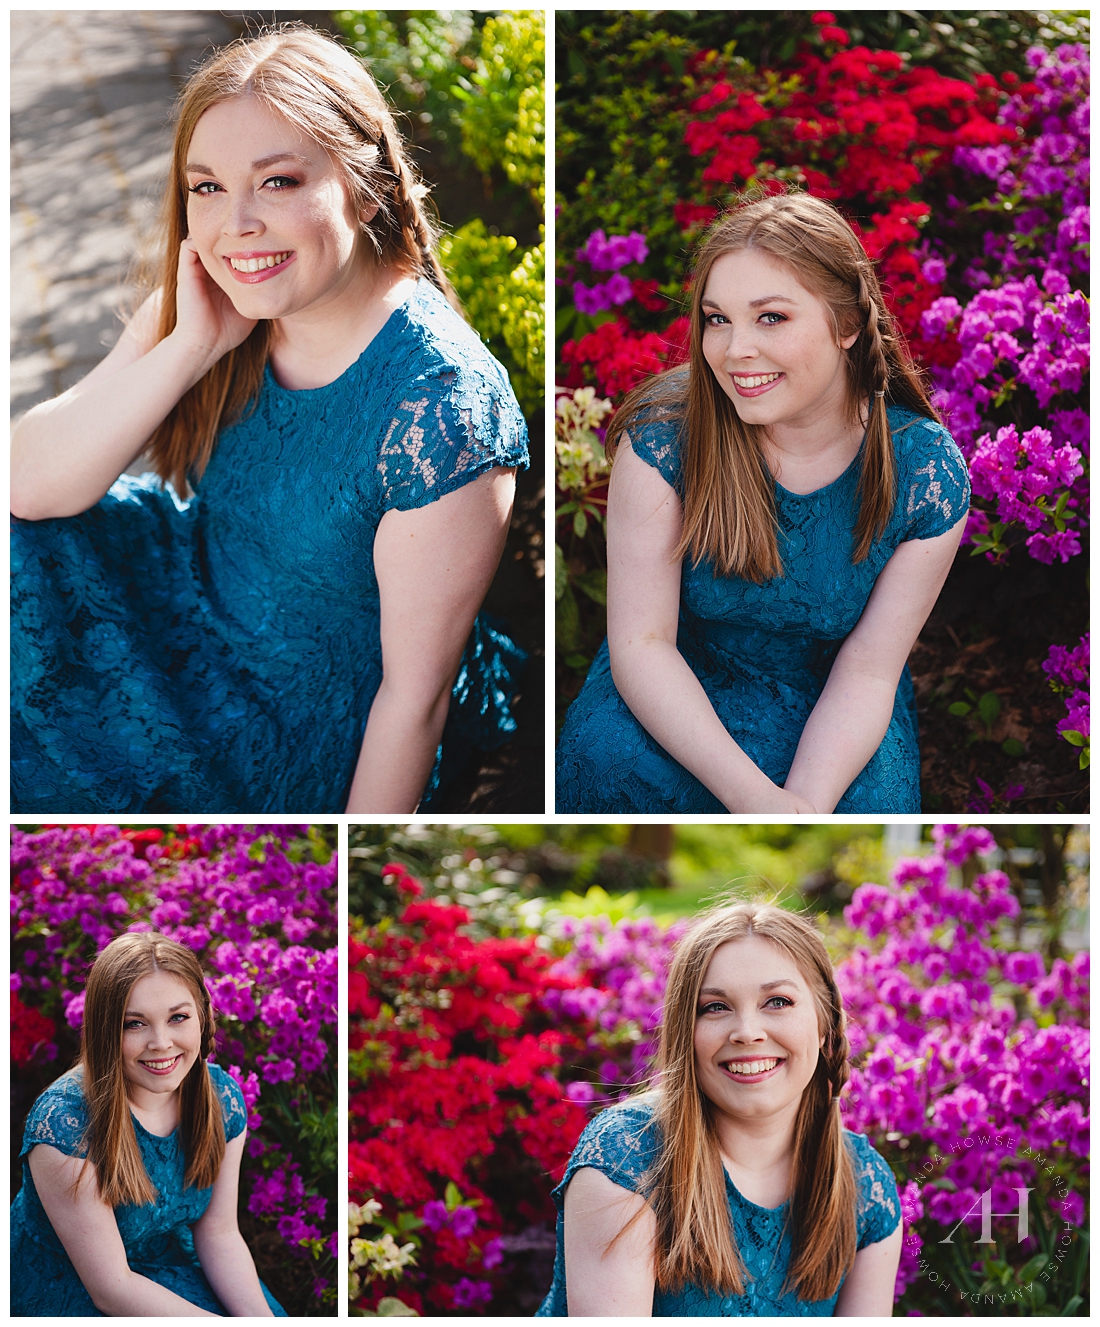 Spring Senior Portraits in Tacoma with Blooming Flowers and Jewel Tones | Outfit Inspo and Pose Ideas for Senior Portraits | Photographed by Amanda Howse